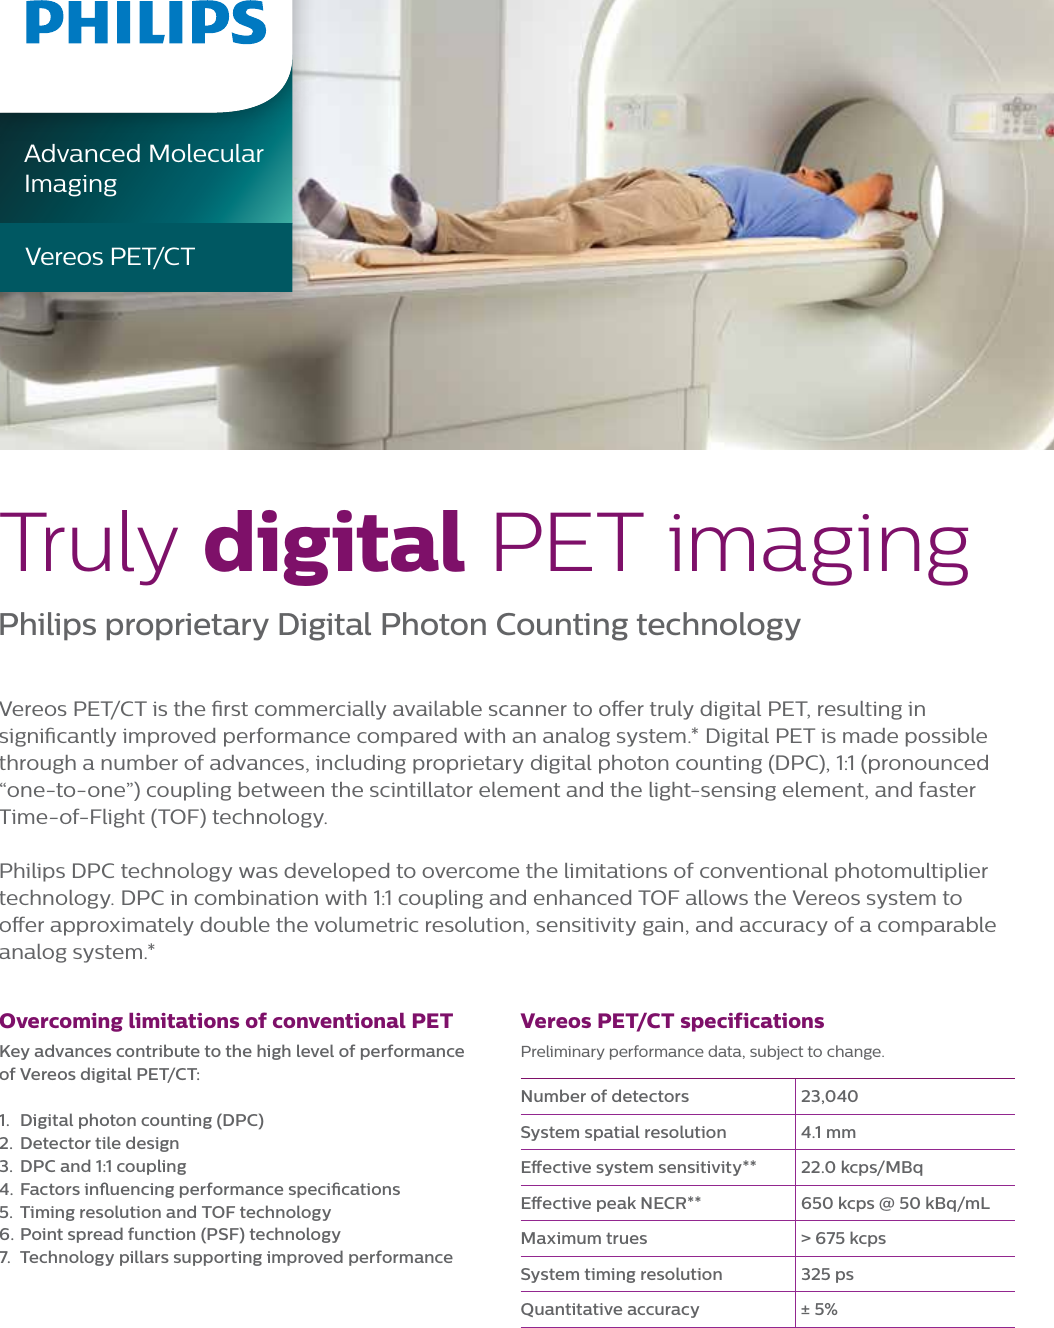 Page 1 of 12 - Philips 882446 User Manual Product Brochure Vereos The World's First And Only True Digital PET/CT System Ed2389b512114e209f2fa77c0145f267